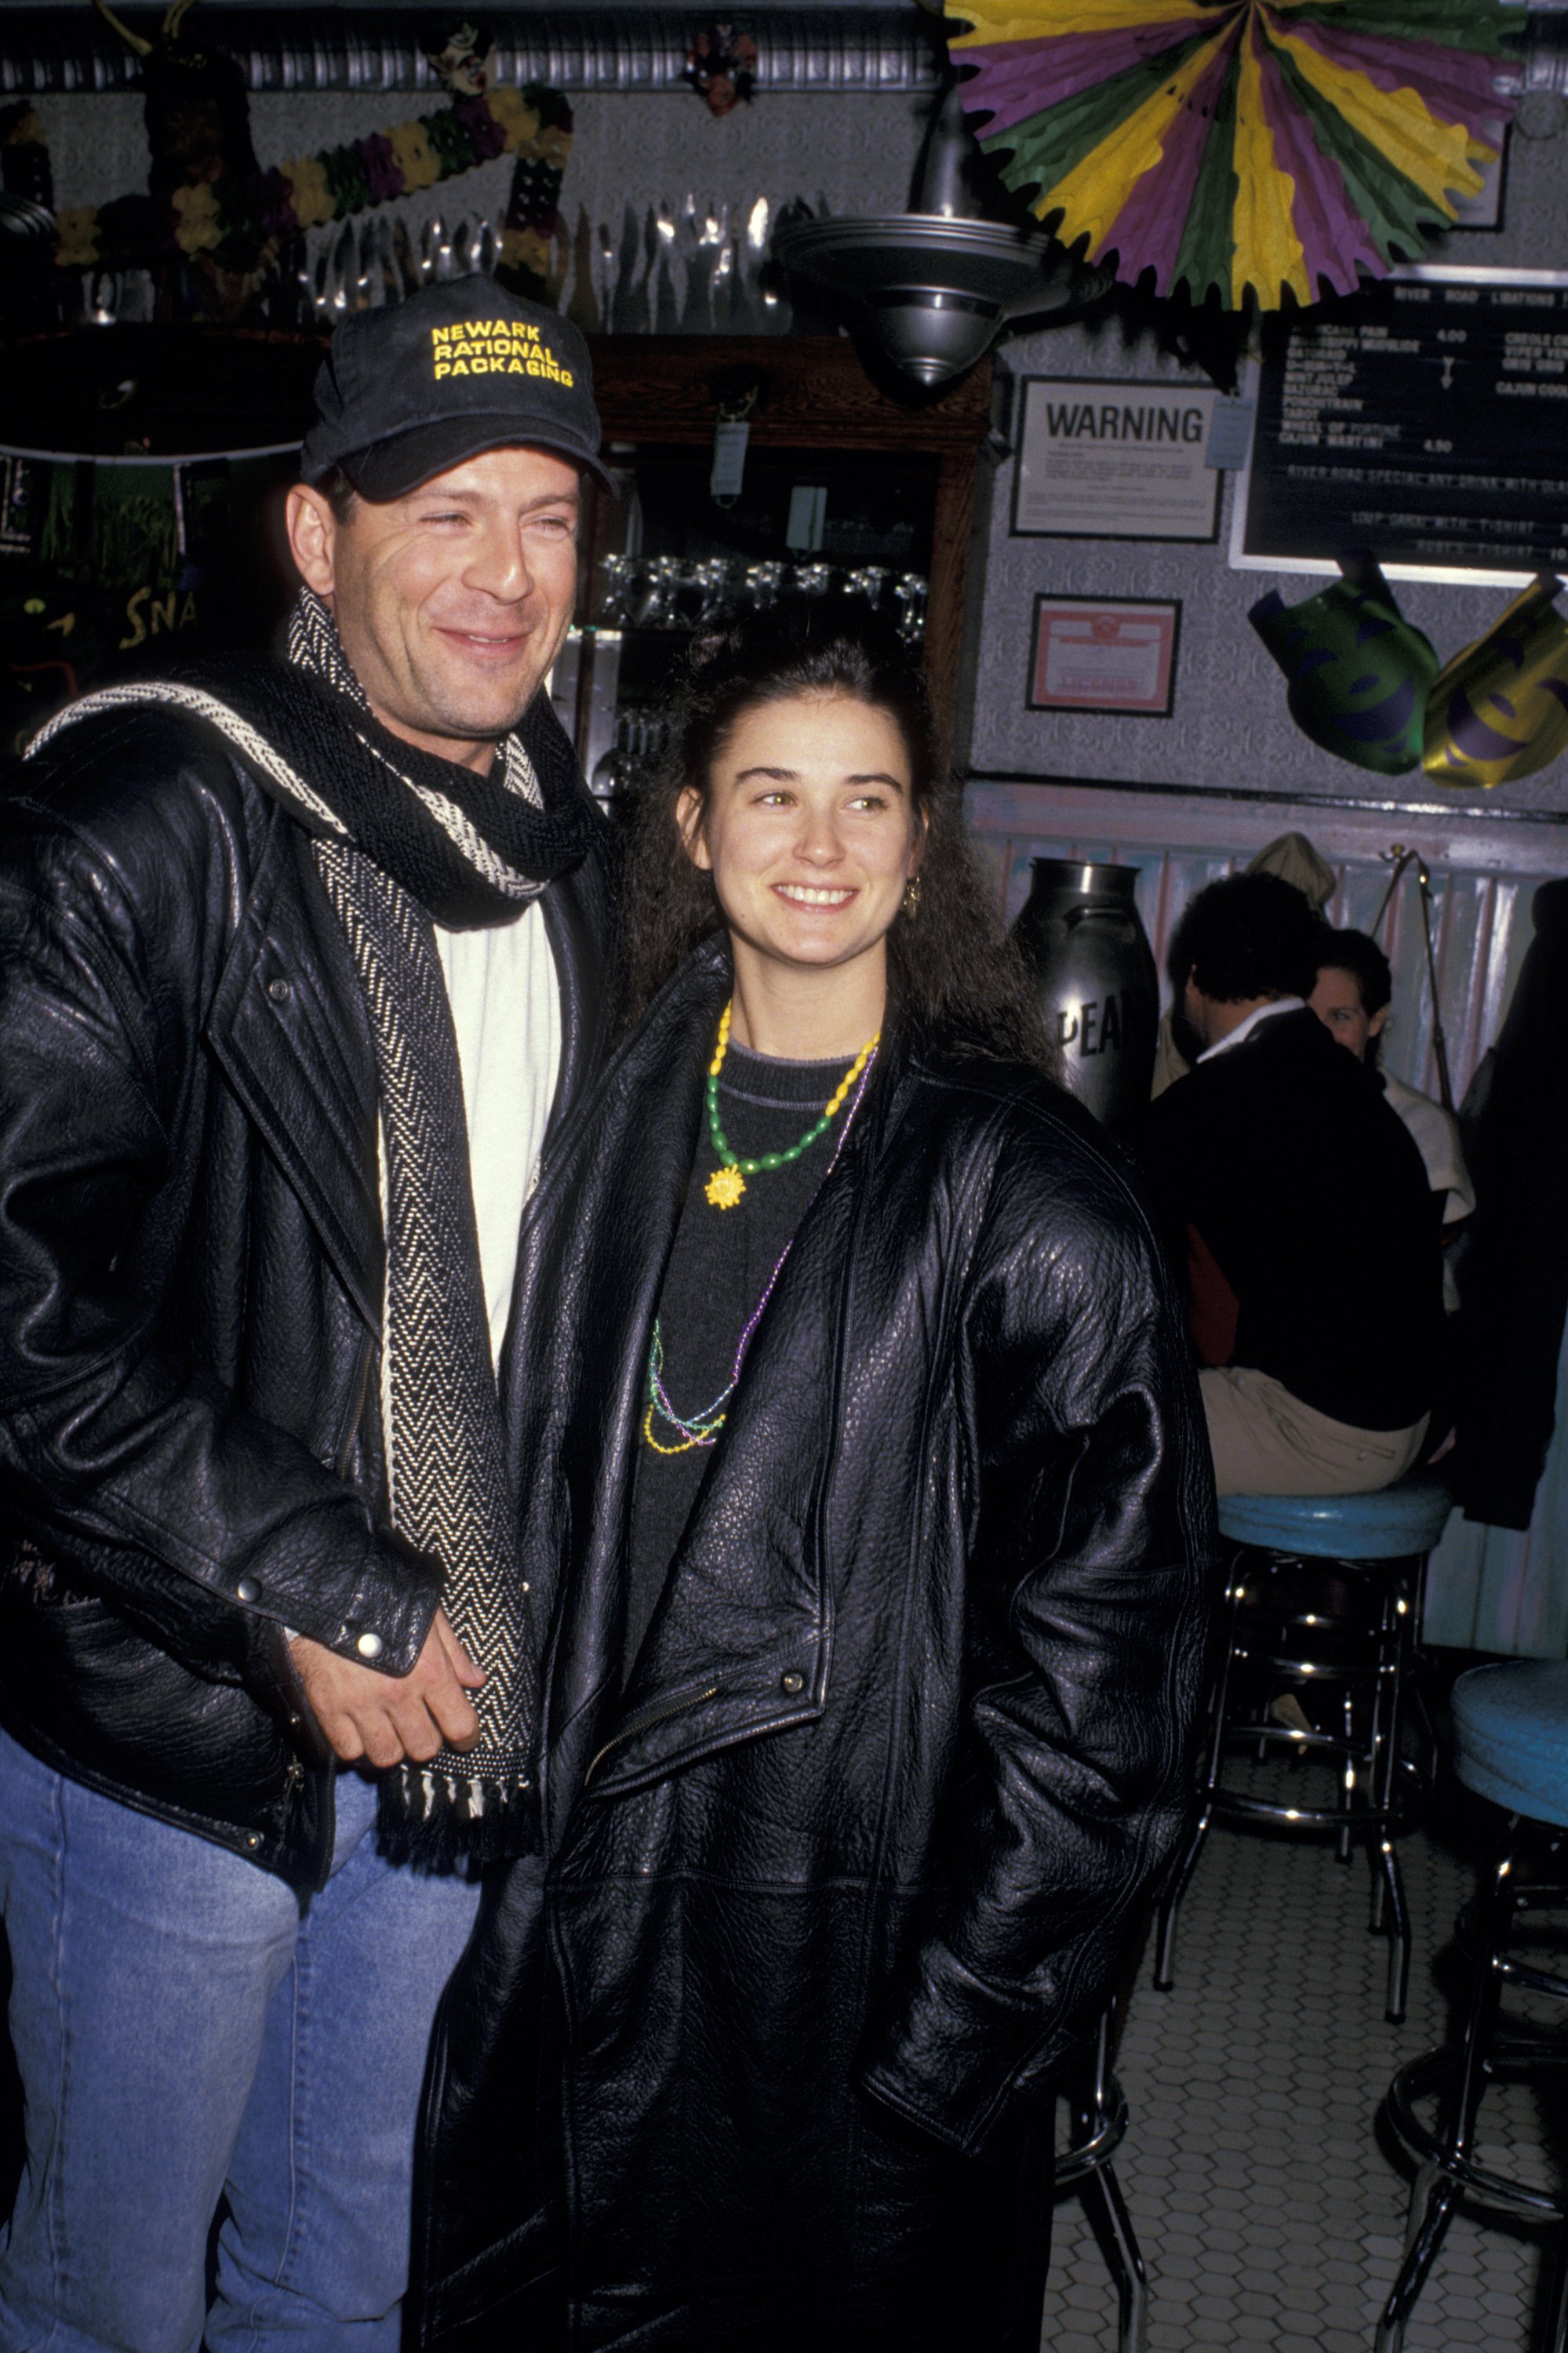 Bruce Willis and Demi Moore pictured at the Ruby's River Road Cafe in New York City on February 15, 1988 | Source: Getty Images